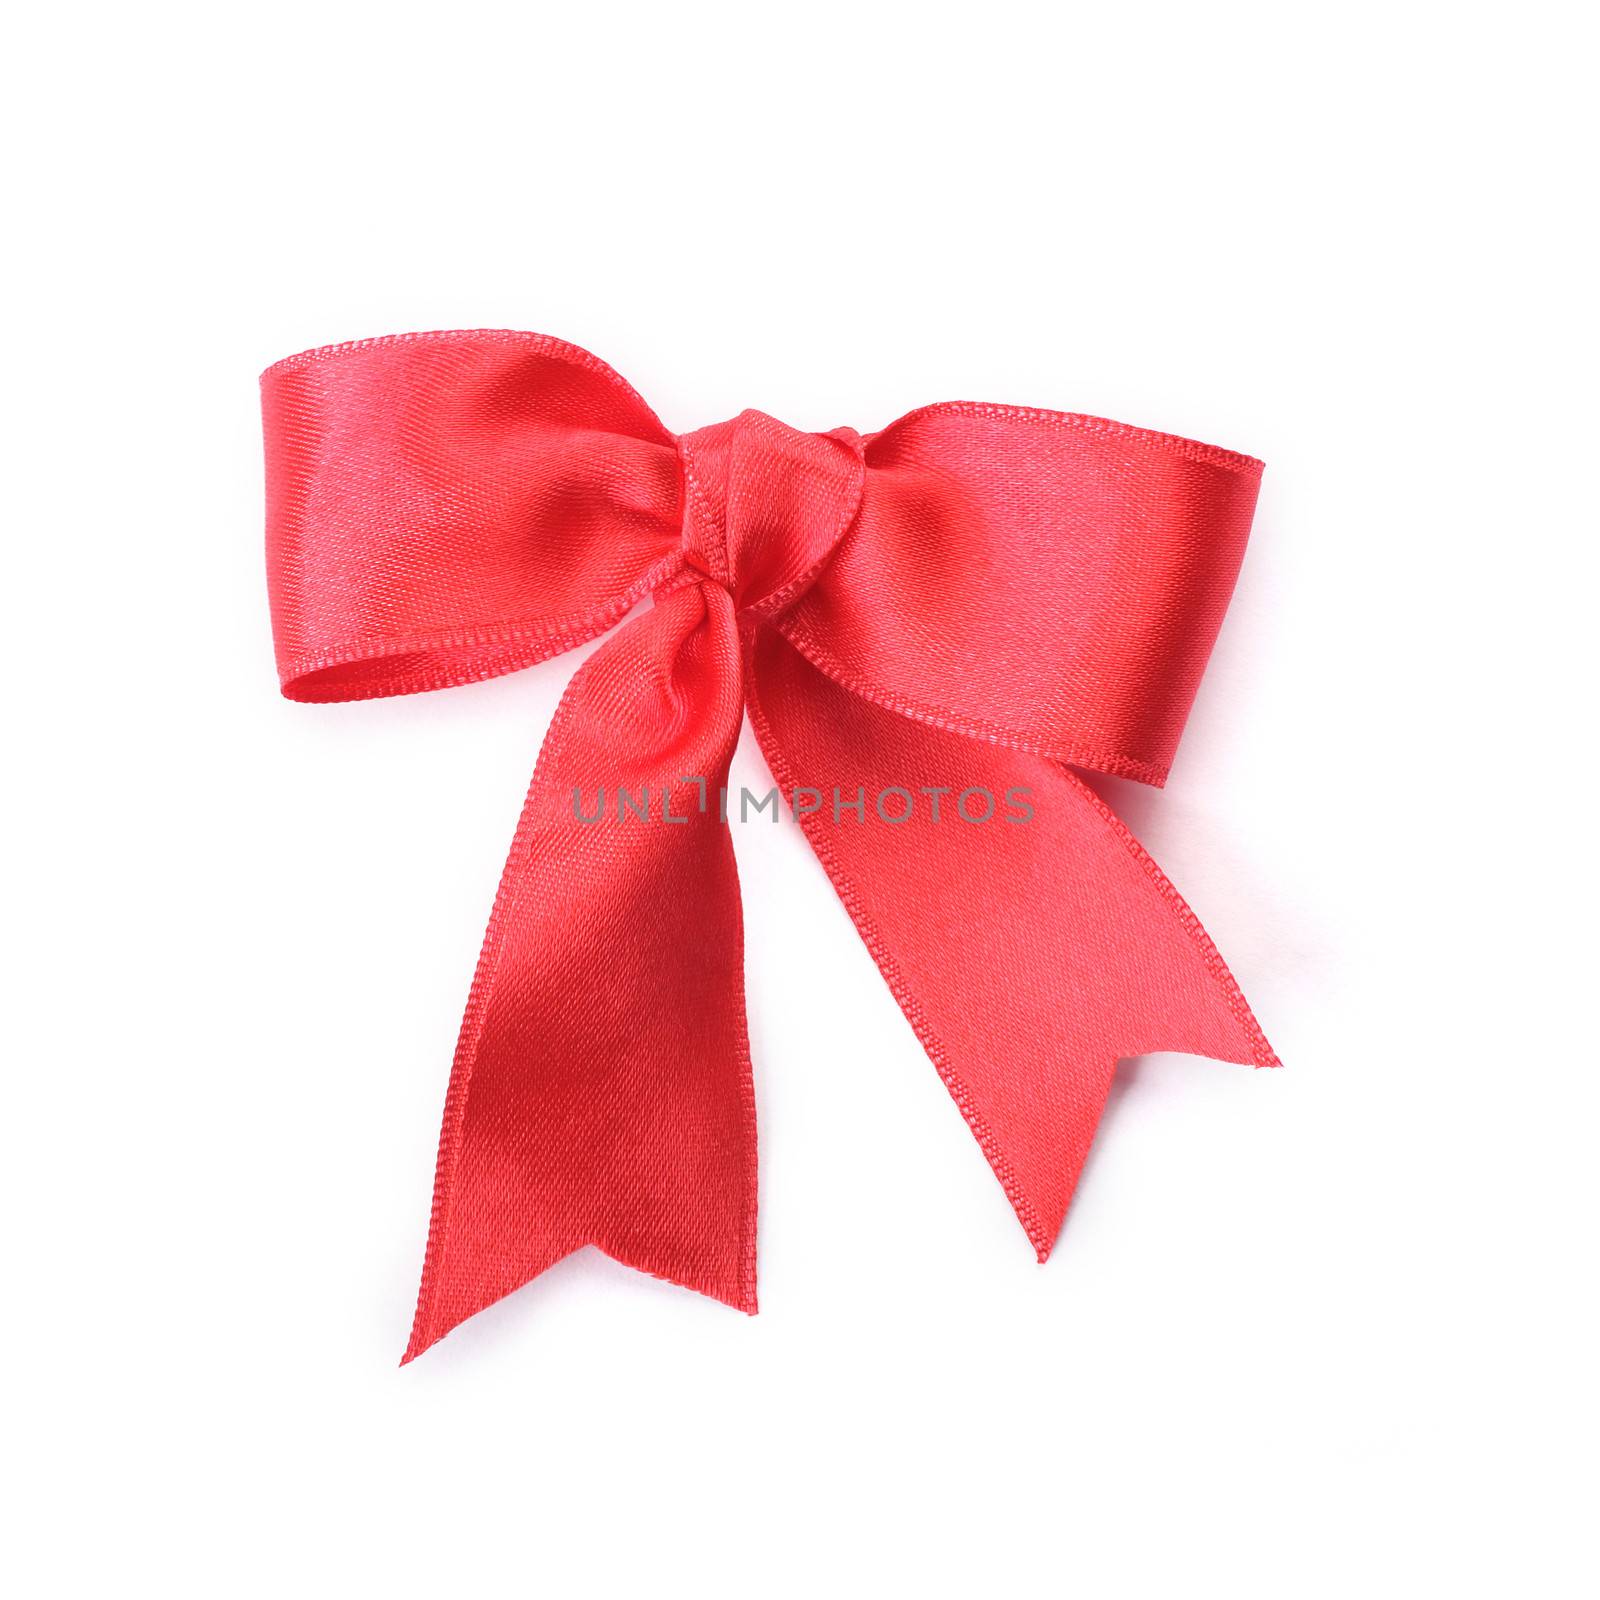 Red bow on white background.